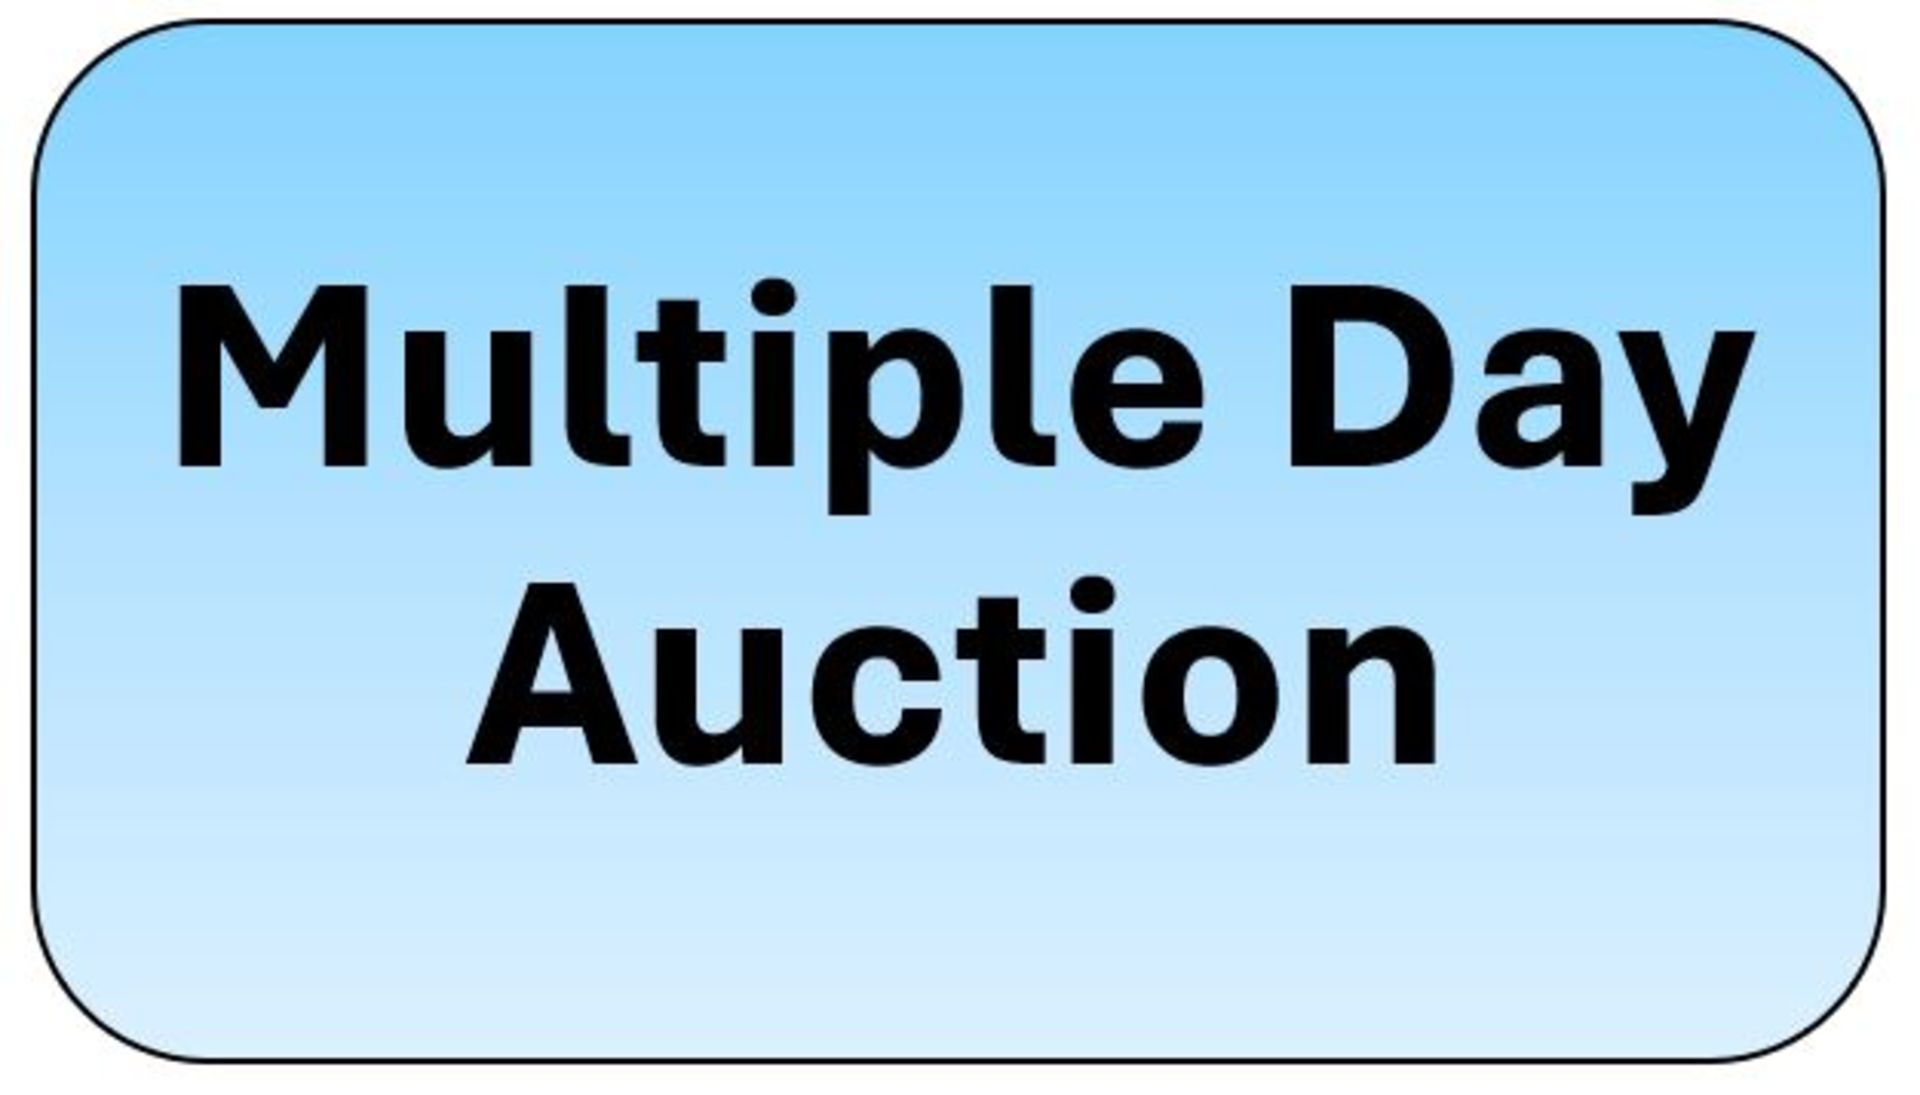 This is a 2 Day Auction, see description for a link to Day 2 listing